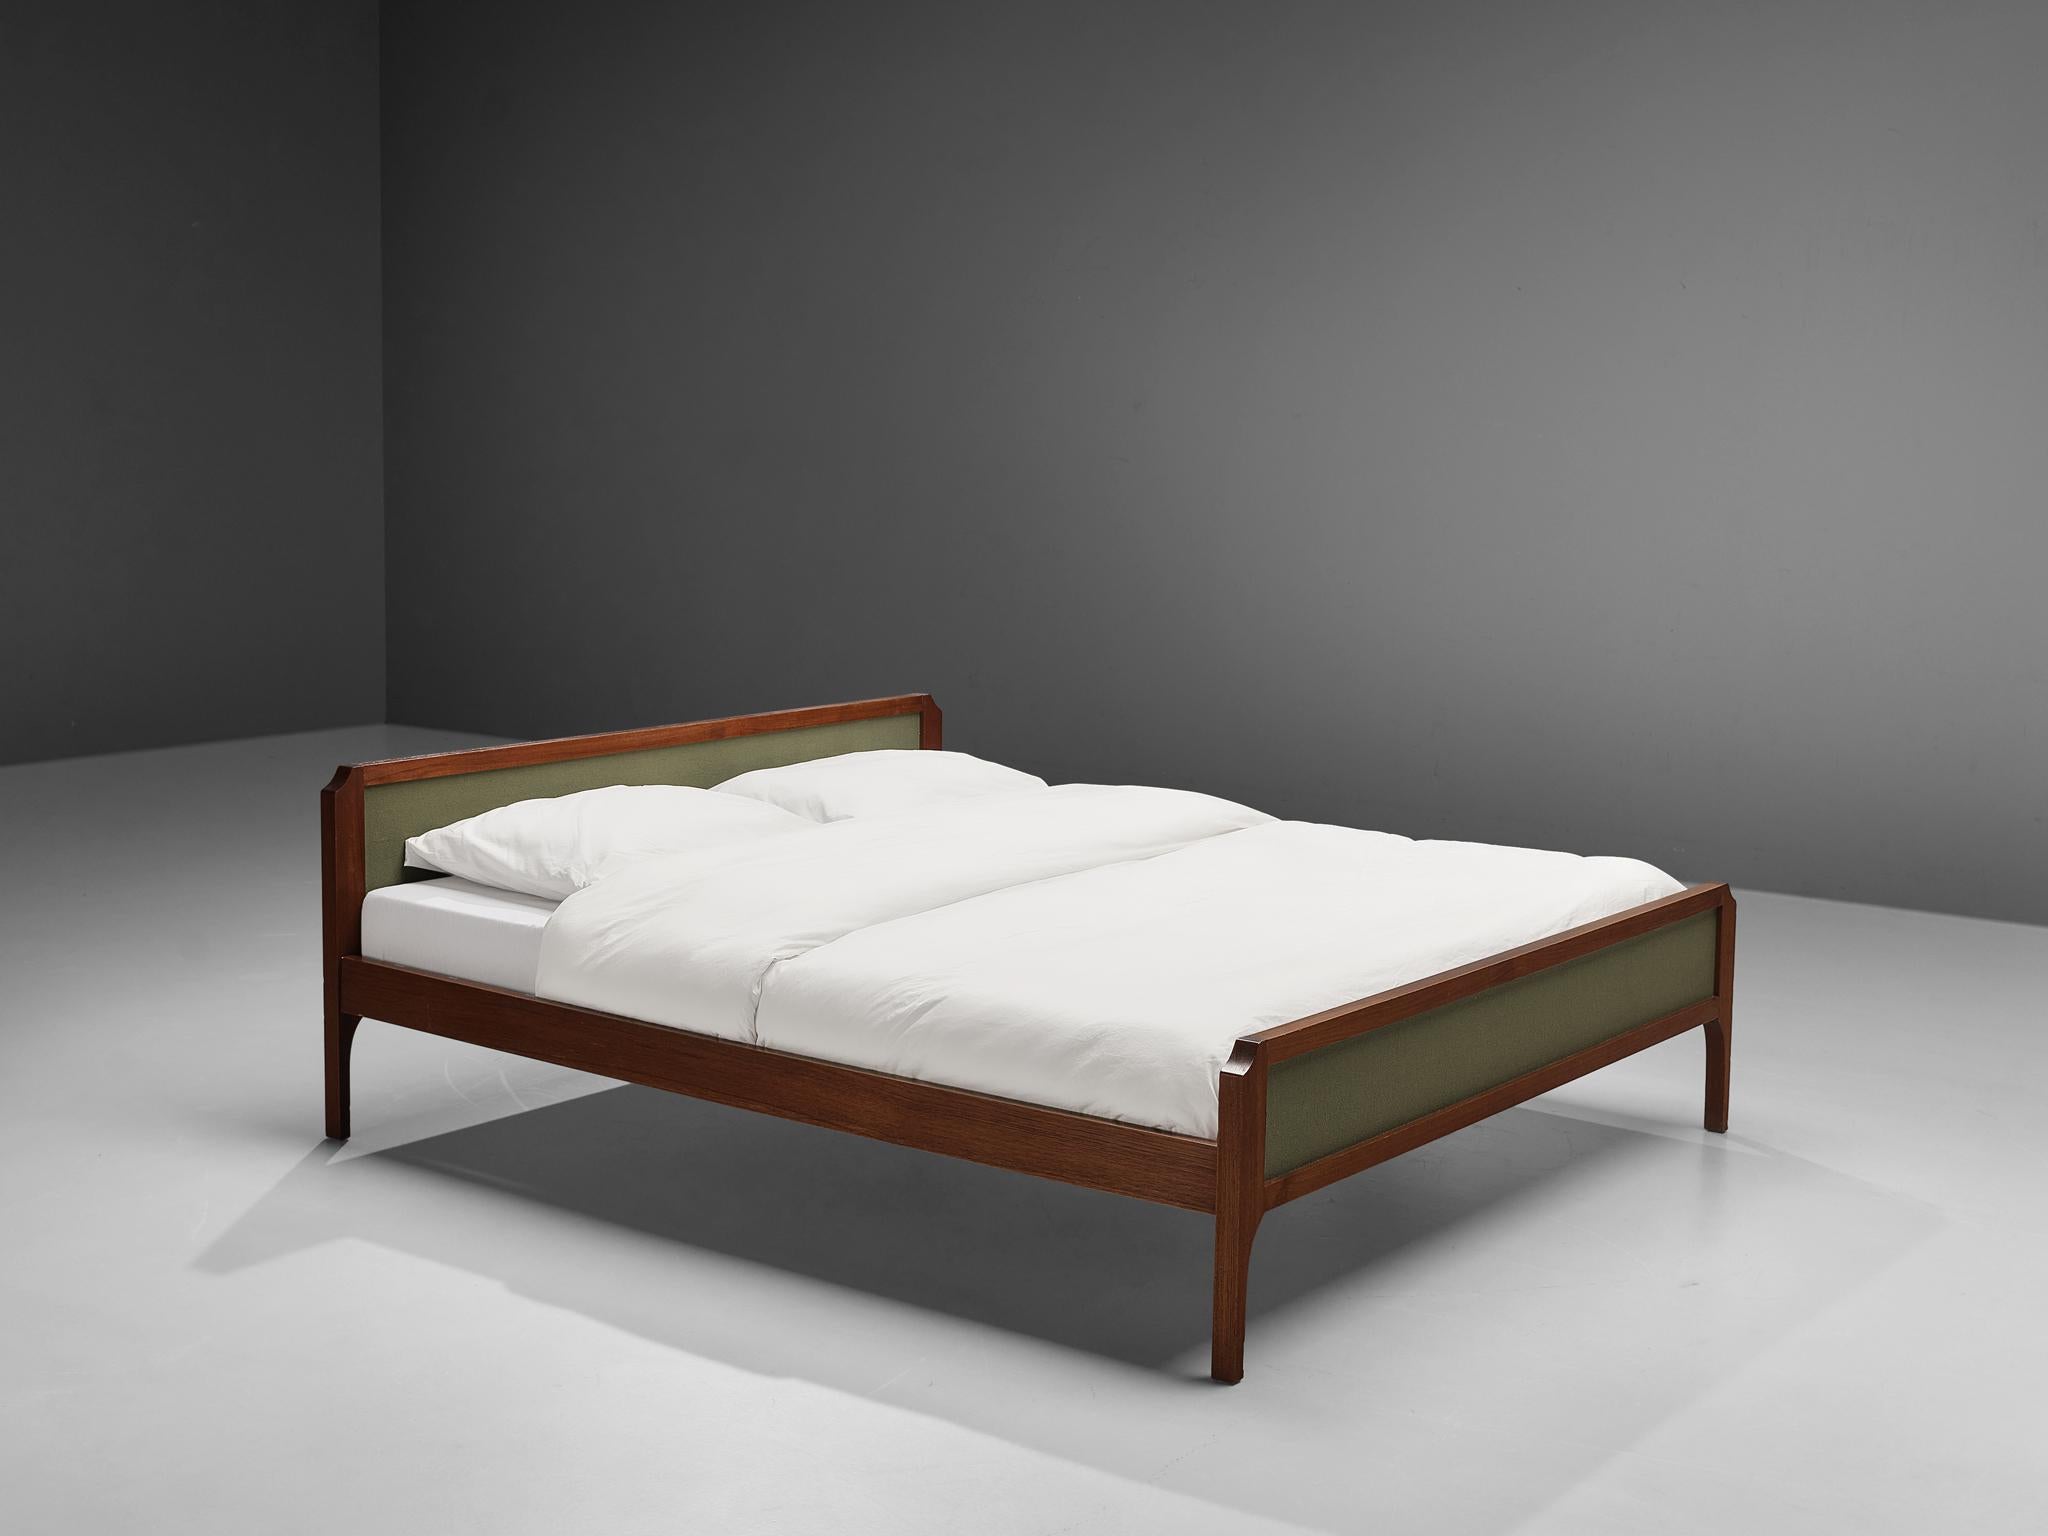 Double bed, teak, green fabric, Italy, 1950s

This double bed is characterized by a teak frame that is combined with moss green fabric. The frame shows elegant details in the way how the corners are designed or the leg flows into the board in a